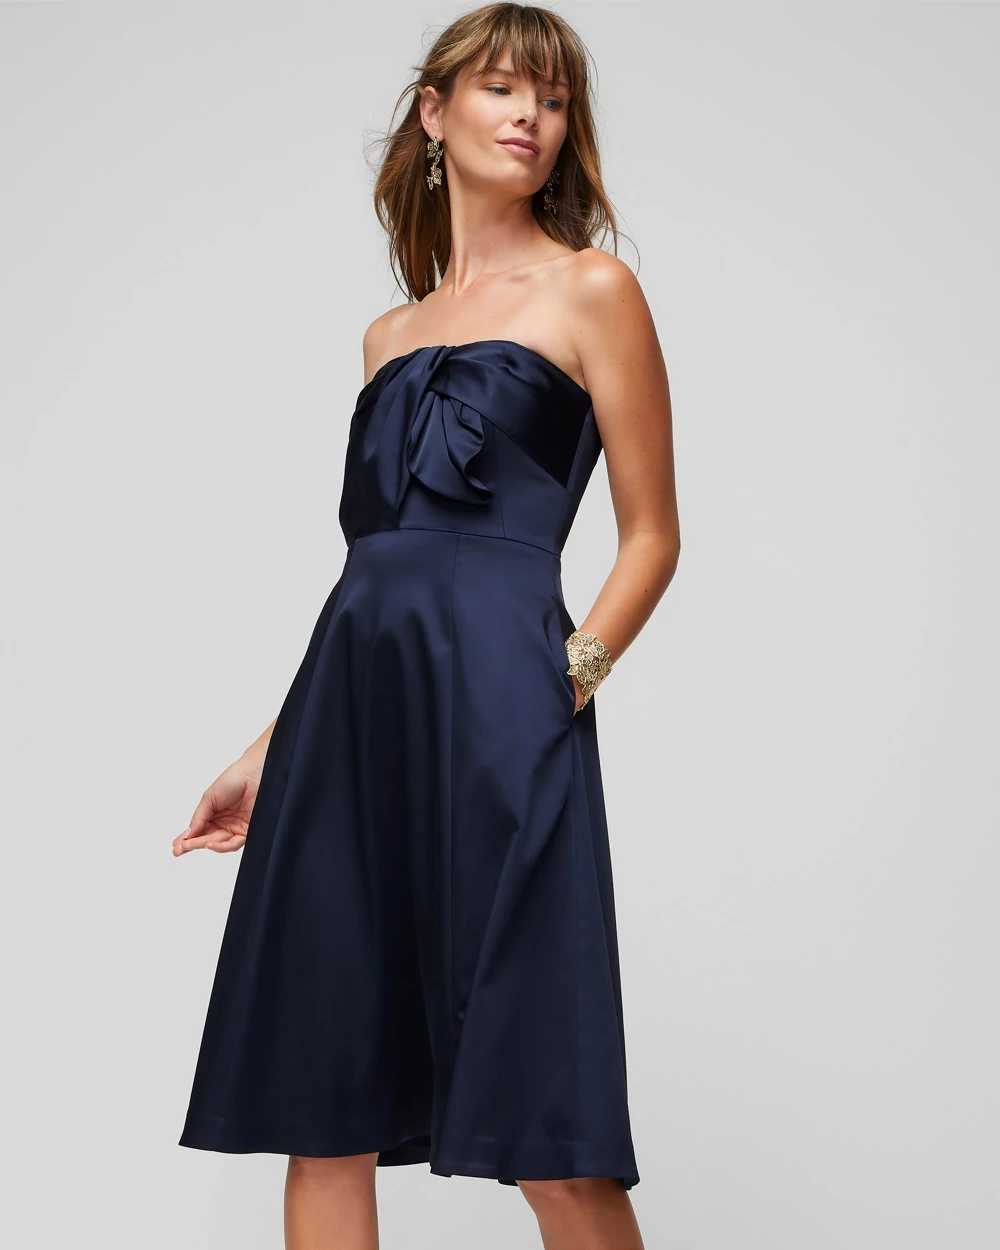 Sleeveless Satin Draped Fit-and-Flare Midi Dress click to view larger image.